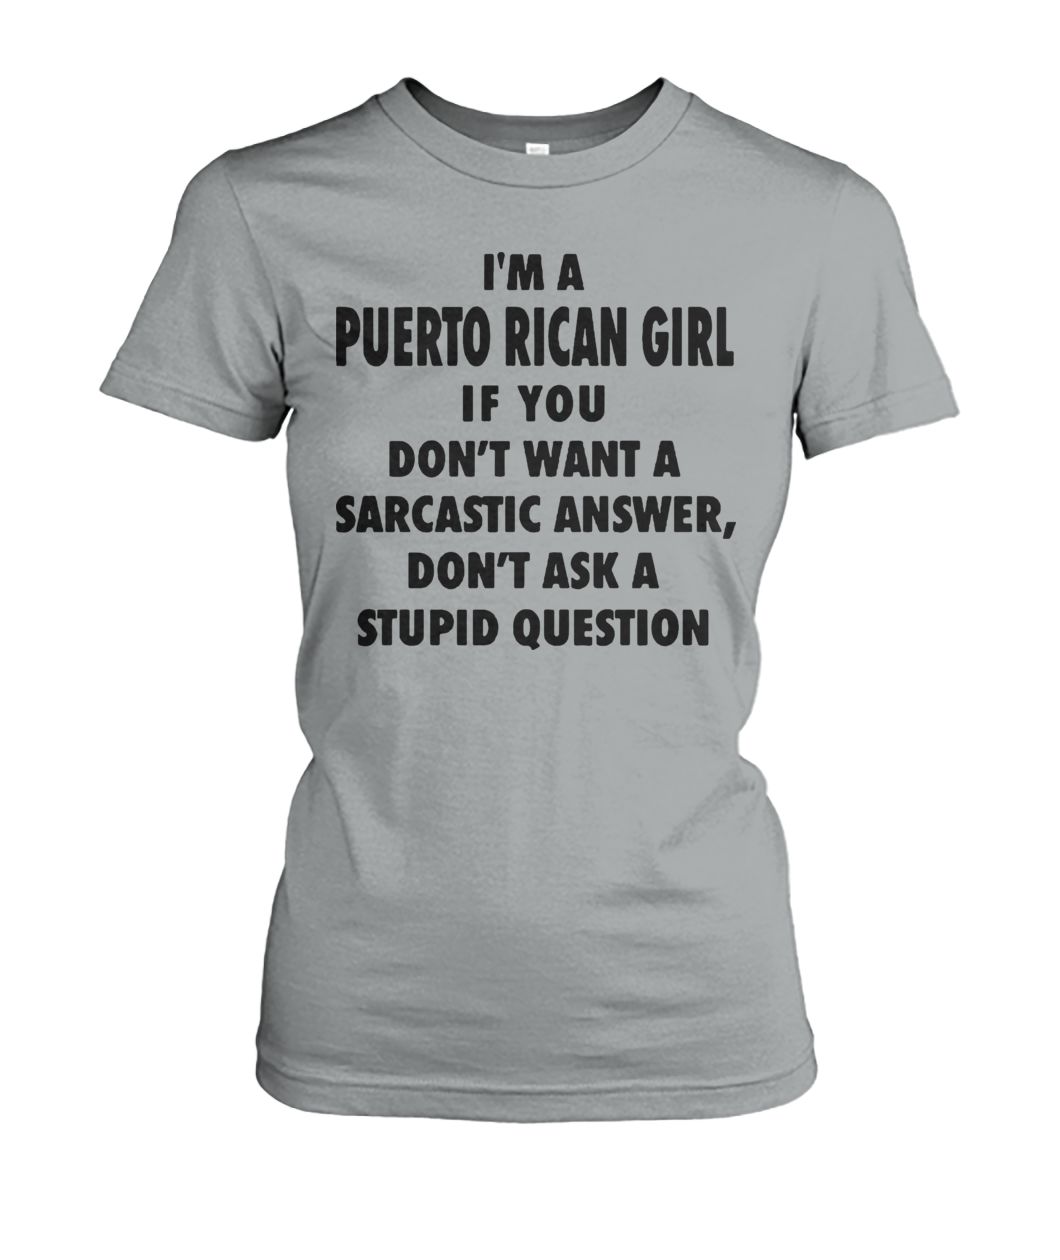 I'm an puerto rican girl if you don't want a sarcastic answer don't ask a stupid question women's crew tee